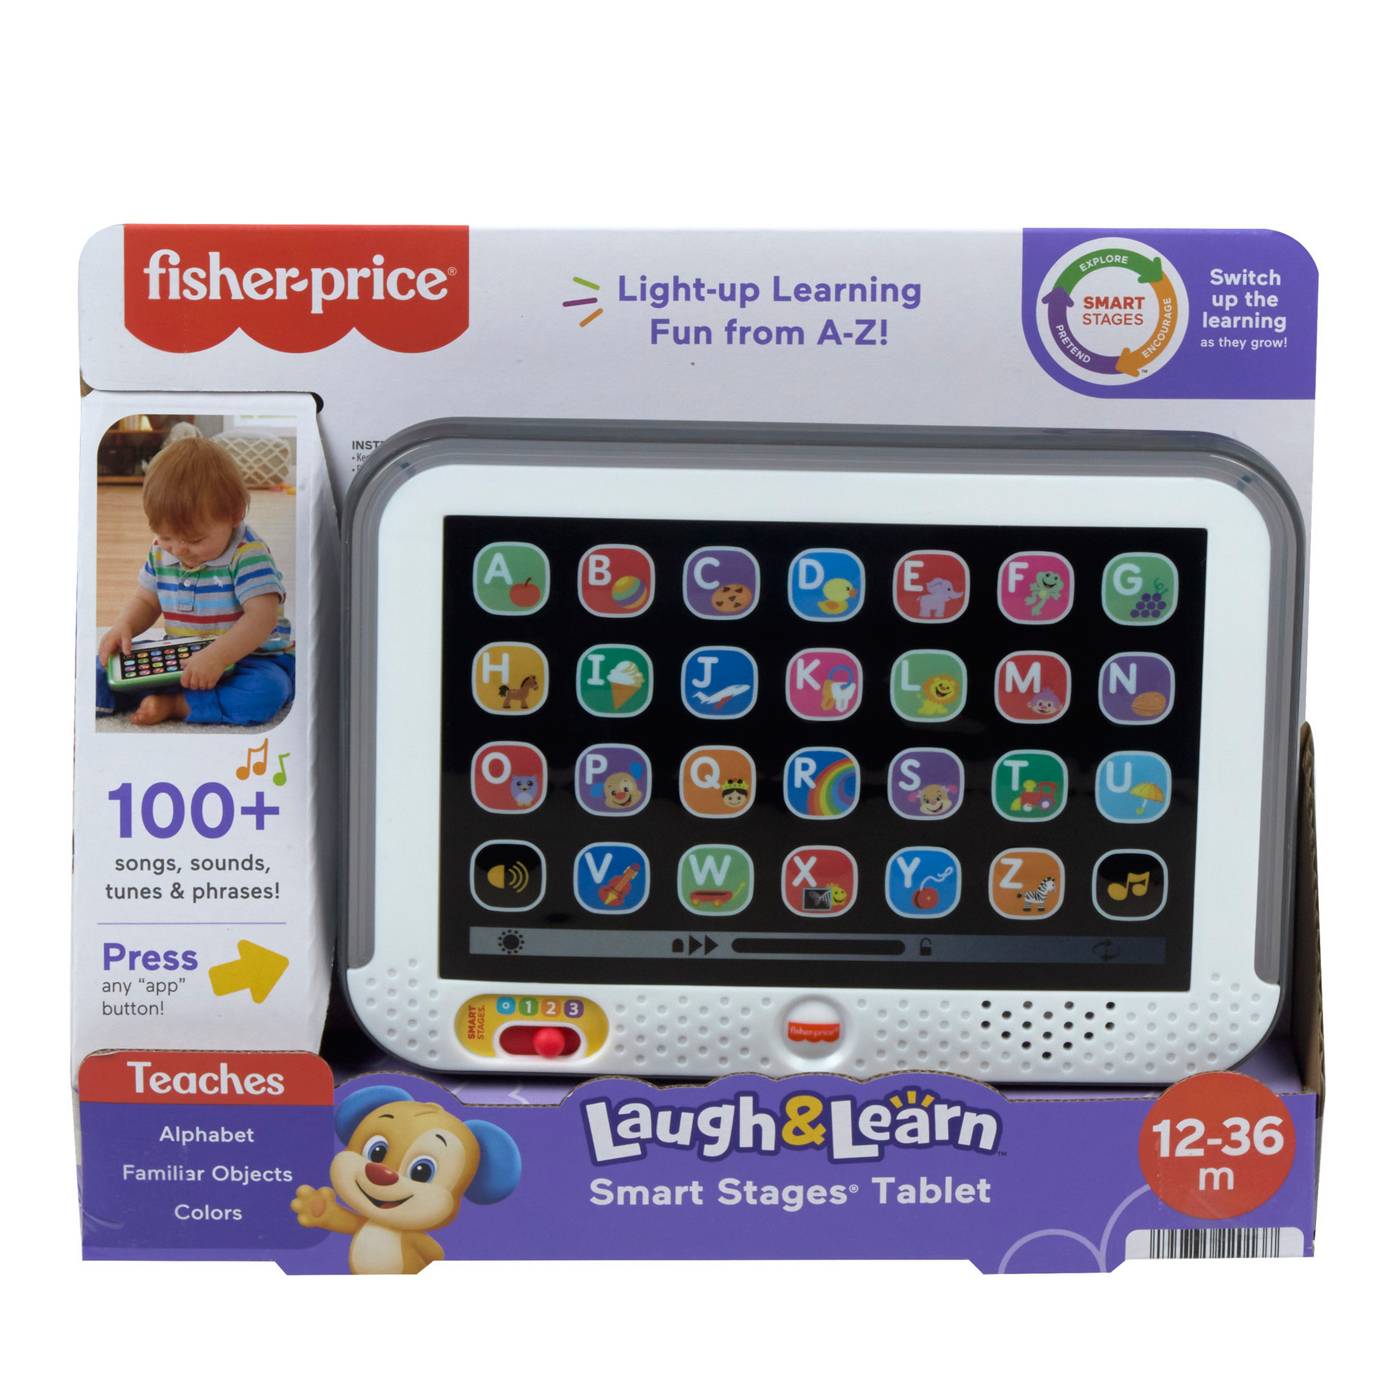 Fisher-Price Laugh & Learn Smart Stages Tablet; image 1 of 3